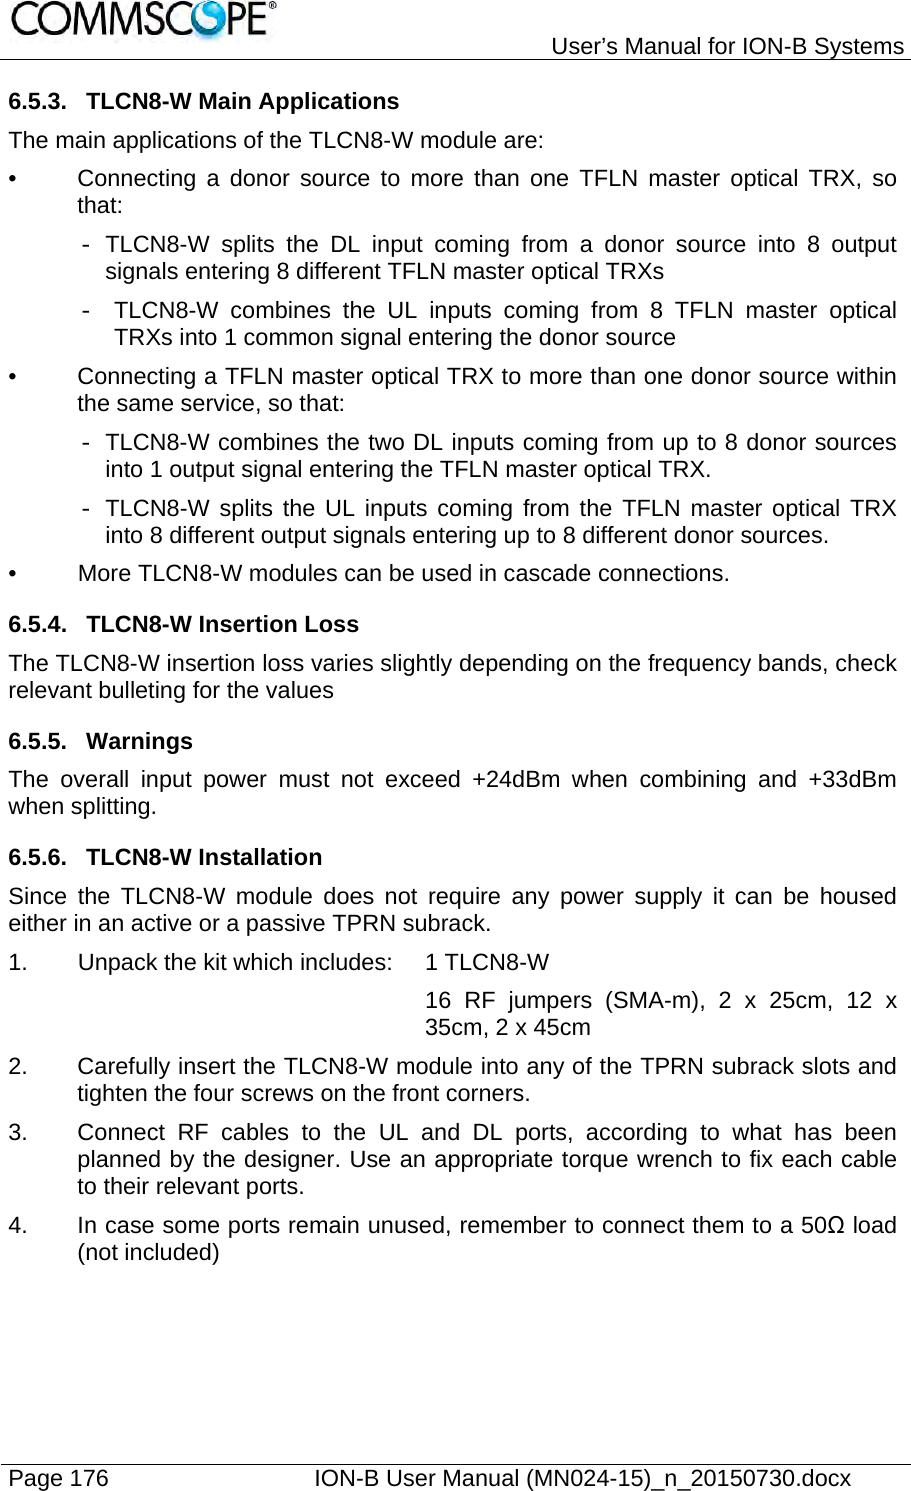   User’s Manual for ION-B Systems Page 176    ION-B User Manual (MN024-15)_n_20150730.docx  6.5.3.  TLCN8-W Main Applications The main applications of the TLCN8-W module are:  •  Connecting a donor source to more than one TFLN master optical TRX, so that: - TLCN8-W splits the DL input coming from a donor source into 8 output signals entering 8 different TFLN master optical TRXs -  TLCN8-W combines the UL inputs coming from 8 TFLN master optical TRXs into 1 common signal entering the donor source •  Connecting a TFLN master optical TRX to more than one donor source within the same service, so that: -  TLCN8-W combines the two DL inputs coming from up to 8 donor sources into 1 output signal entering the TFLN master optical TRX. - TLCN8-W splits the UL inputs coming from the TFLN master optical TRX into 8 different output signals entering up to 8 different donor sources. •  More TLCN8-W modules can be used in cascade connections. 6.5.4.  TLCN8-W Insertion Loss The TLCN8-W insertion loss varies slightly depending on the frequency bands, check relevant bulleting for the values 6.5.5. Warnings The overall input power must not exceed +24dBm when combining and +33dBm when splitting. 6.5.6. TLCN8-W Installation Since the TLCN8-W module does not require any power supply it can be housed either in an active or a passive TPRN subrack.  1.  Unpack the kit which includes:  1 TLCN8-W 16 RF jumpers (SMA-m), 2 x 25cm, 12 x 35cm, 2 x 45cm 2.  Carefully insert the TLCN8-W module into any of the TPRN subrack slots and tighten the four screws on the front corners. 3.  Connect RF cables to the UL and DL ports, according to what has been planned by the designer. Use an appropriate torque wrench to fix each cable to their relevant ports. 4.  In case some ports remain unused, remember to connect them to a 50Ω load (not included) 